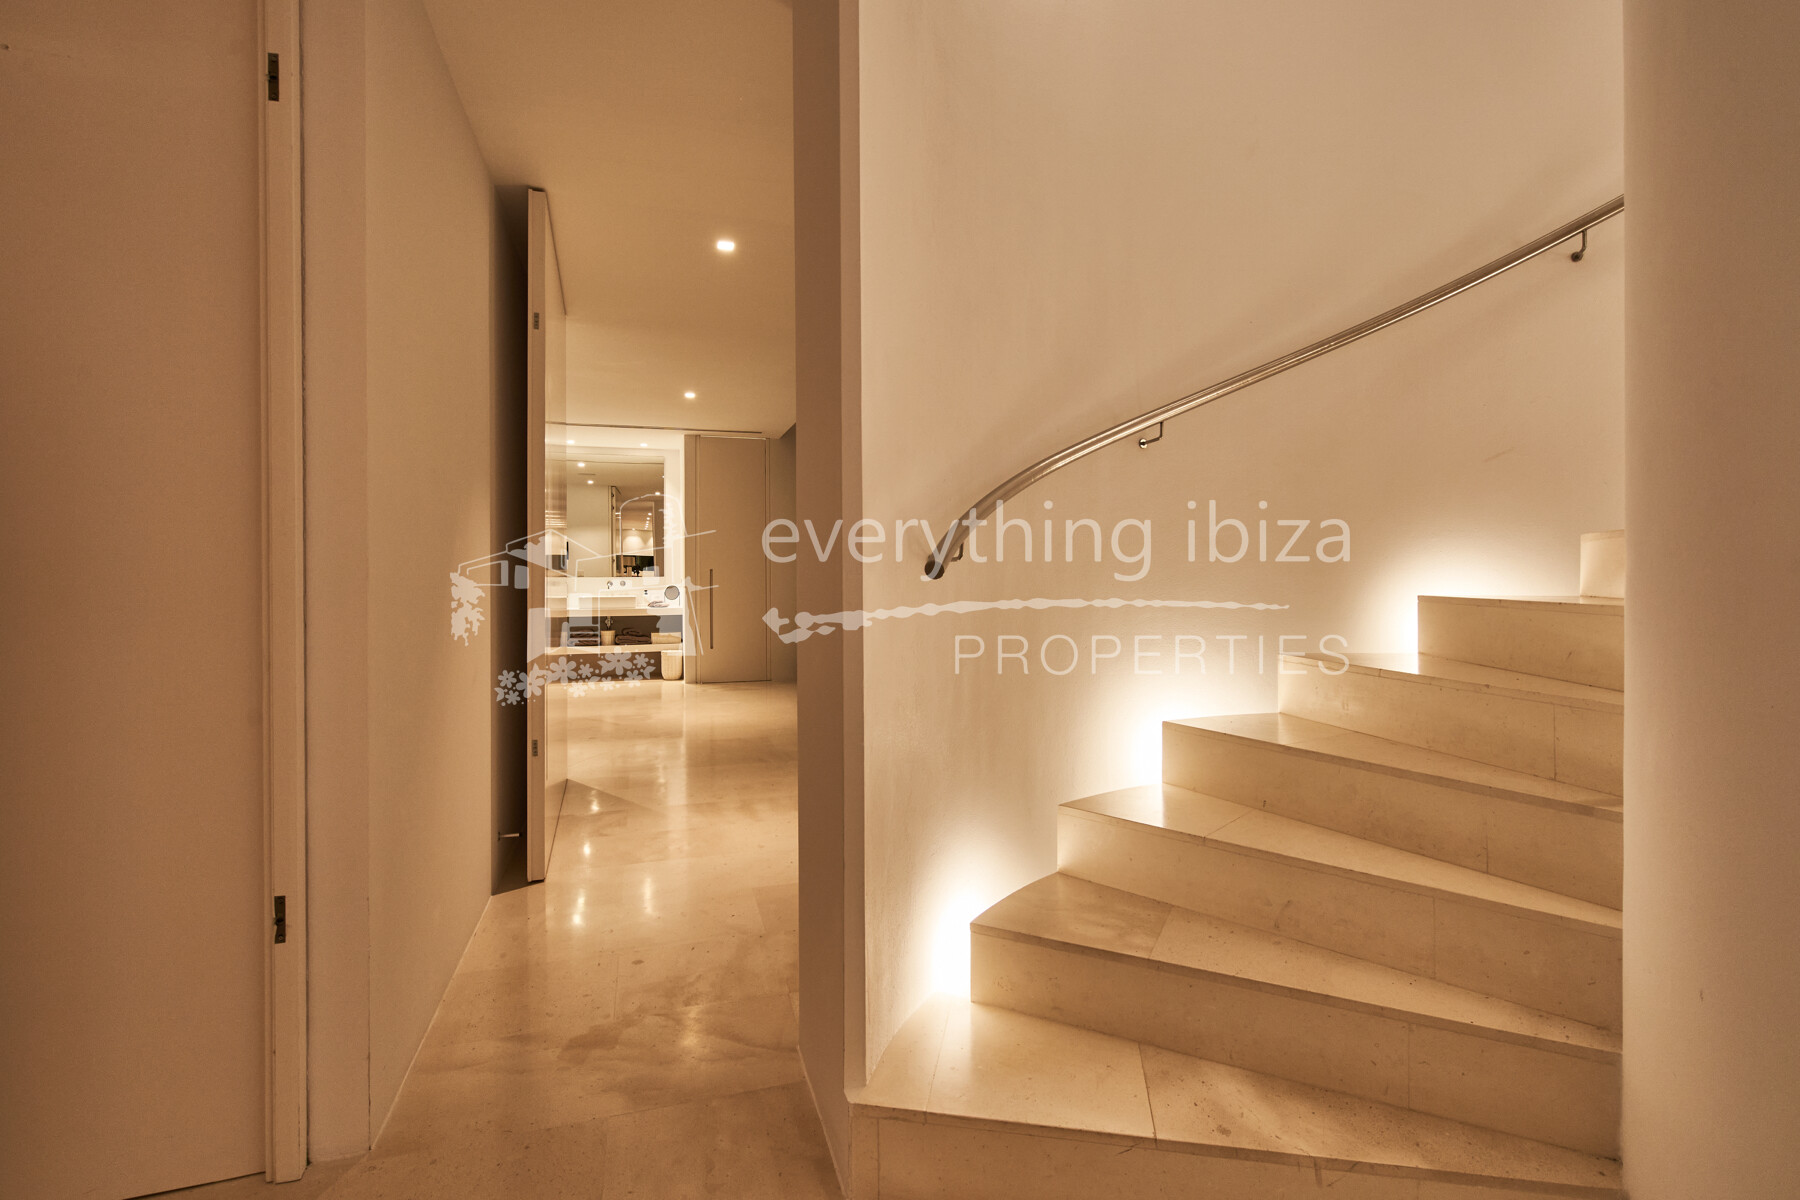 Exquisite Cosmopolitan Detached Villa of the Finest Quality & Design, ref. 1633, for sale in Ibiza by everything ibiza Properties